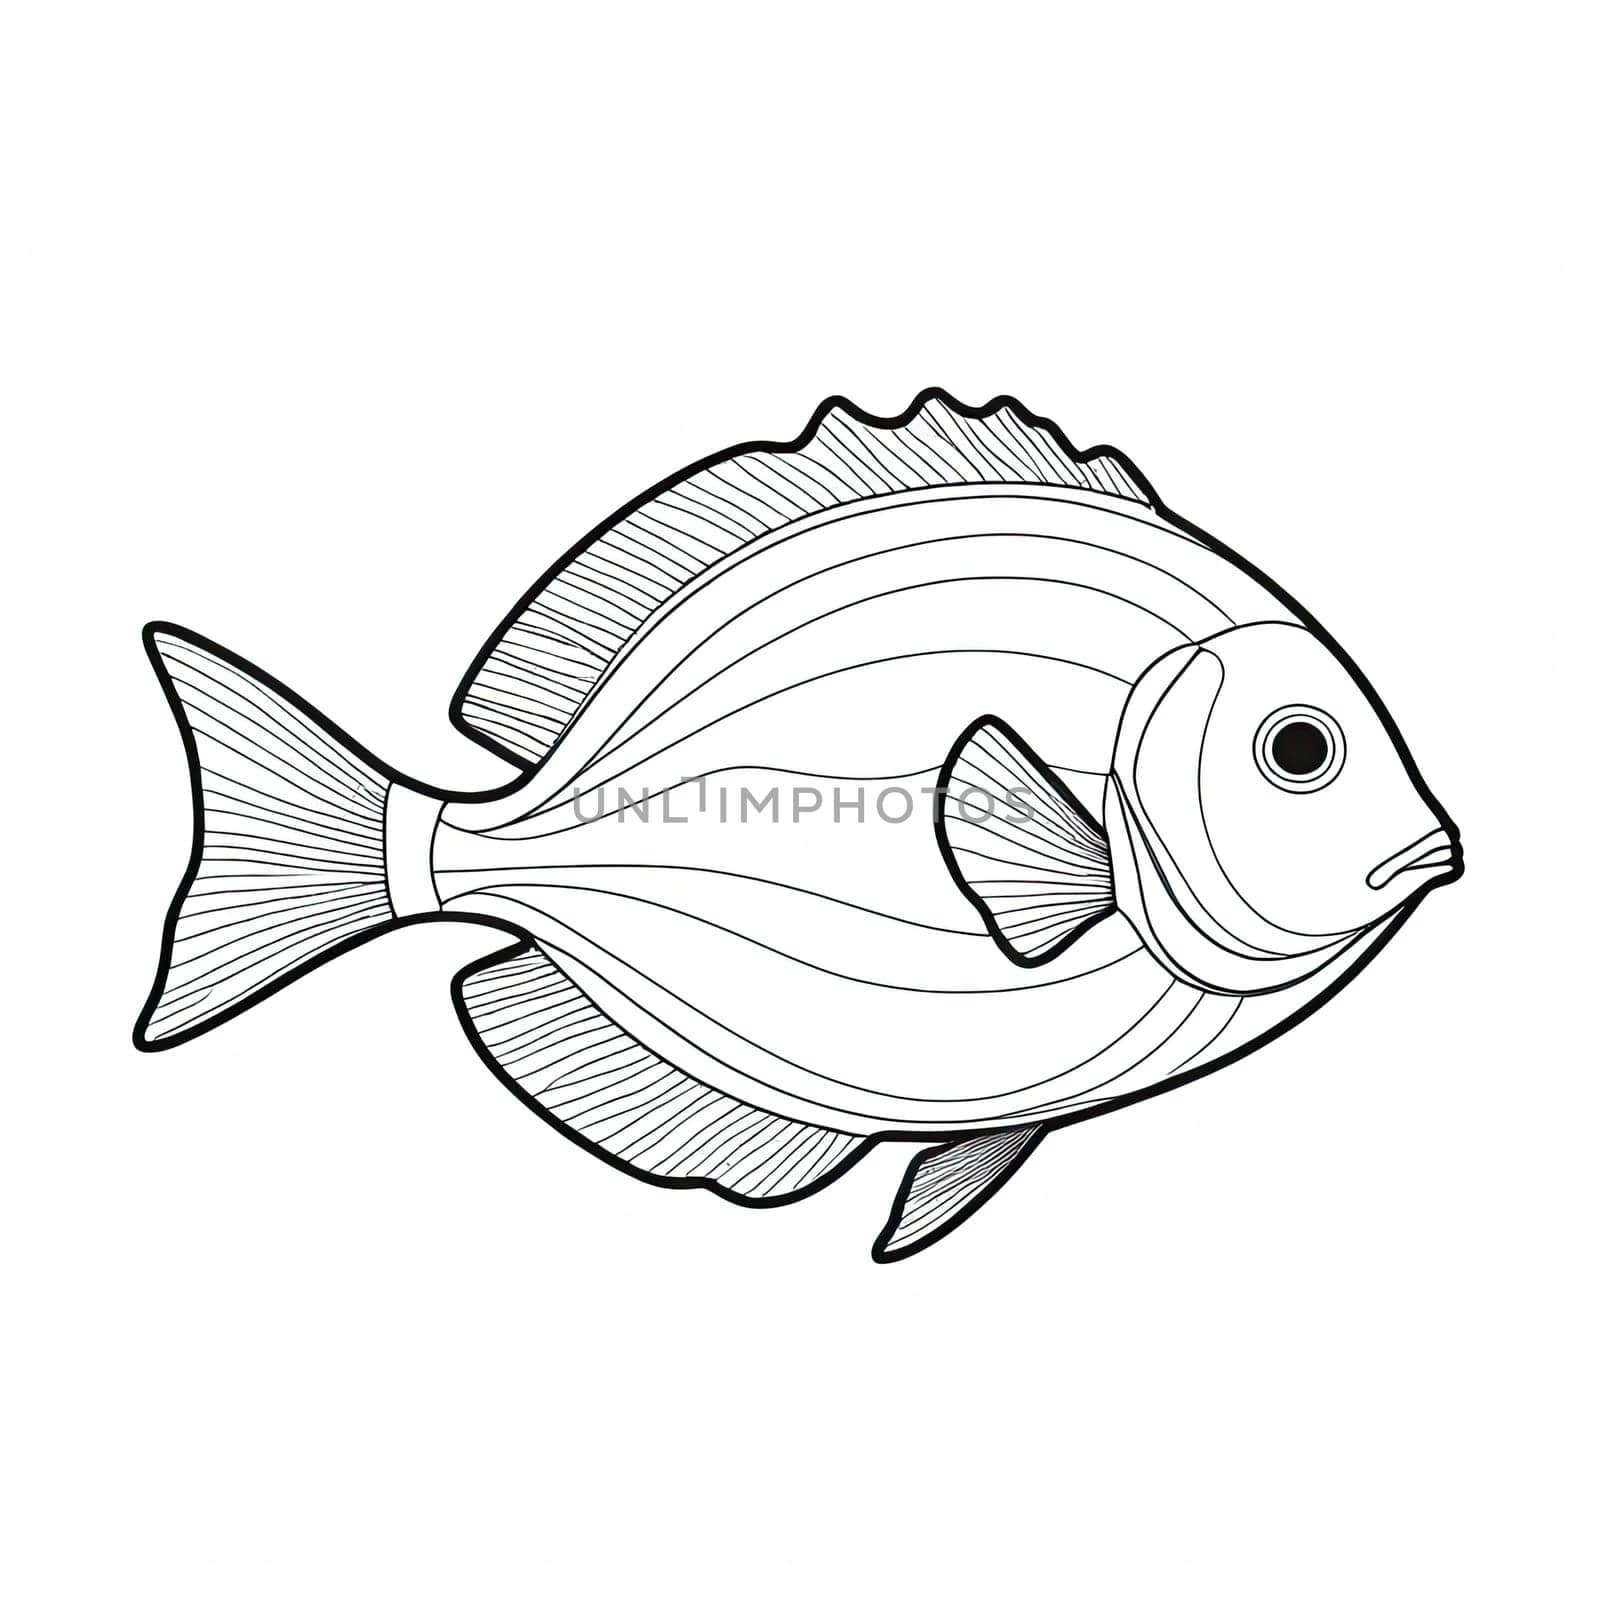 Fish for logo or icon, drawing Elegant minimalist style,abstract style Illustration . High quality photo